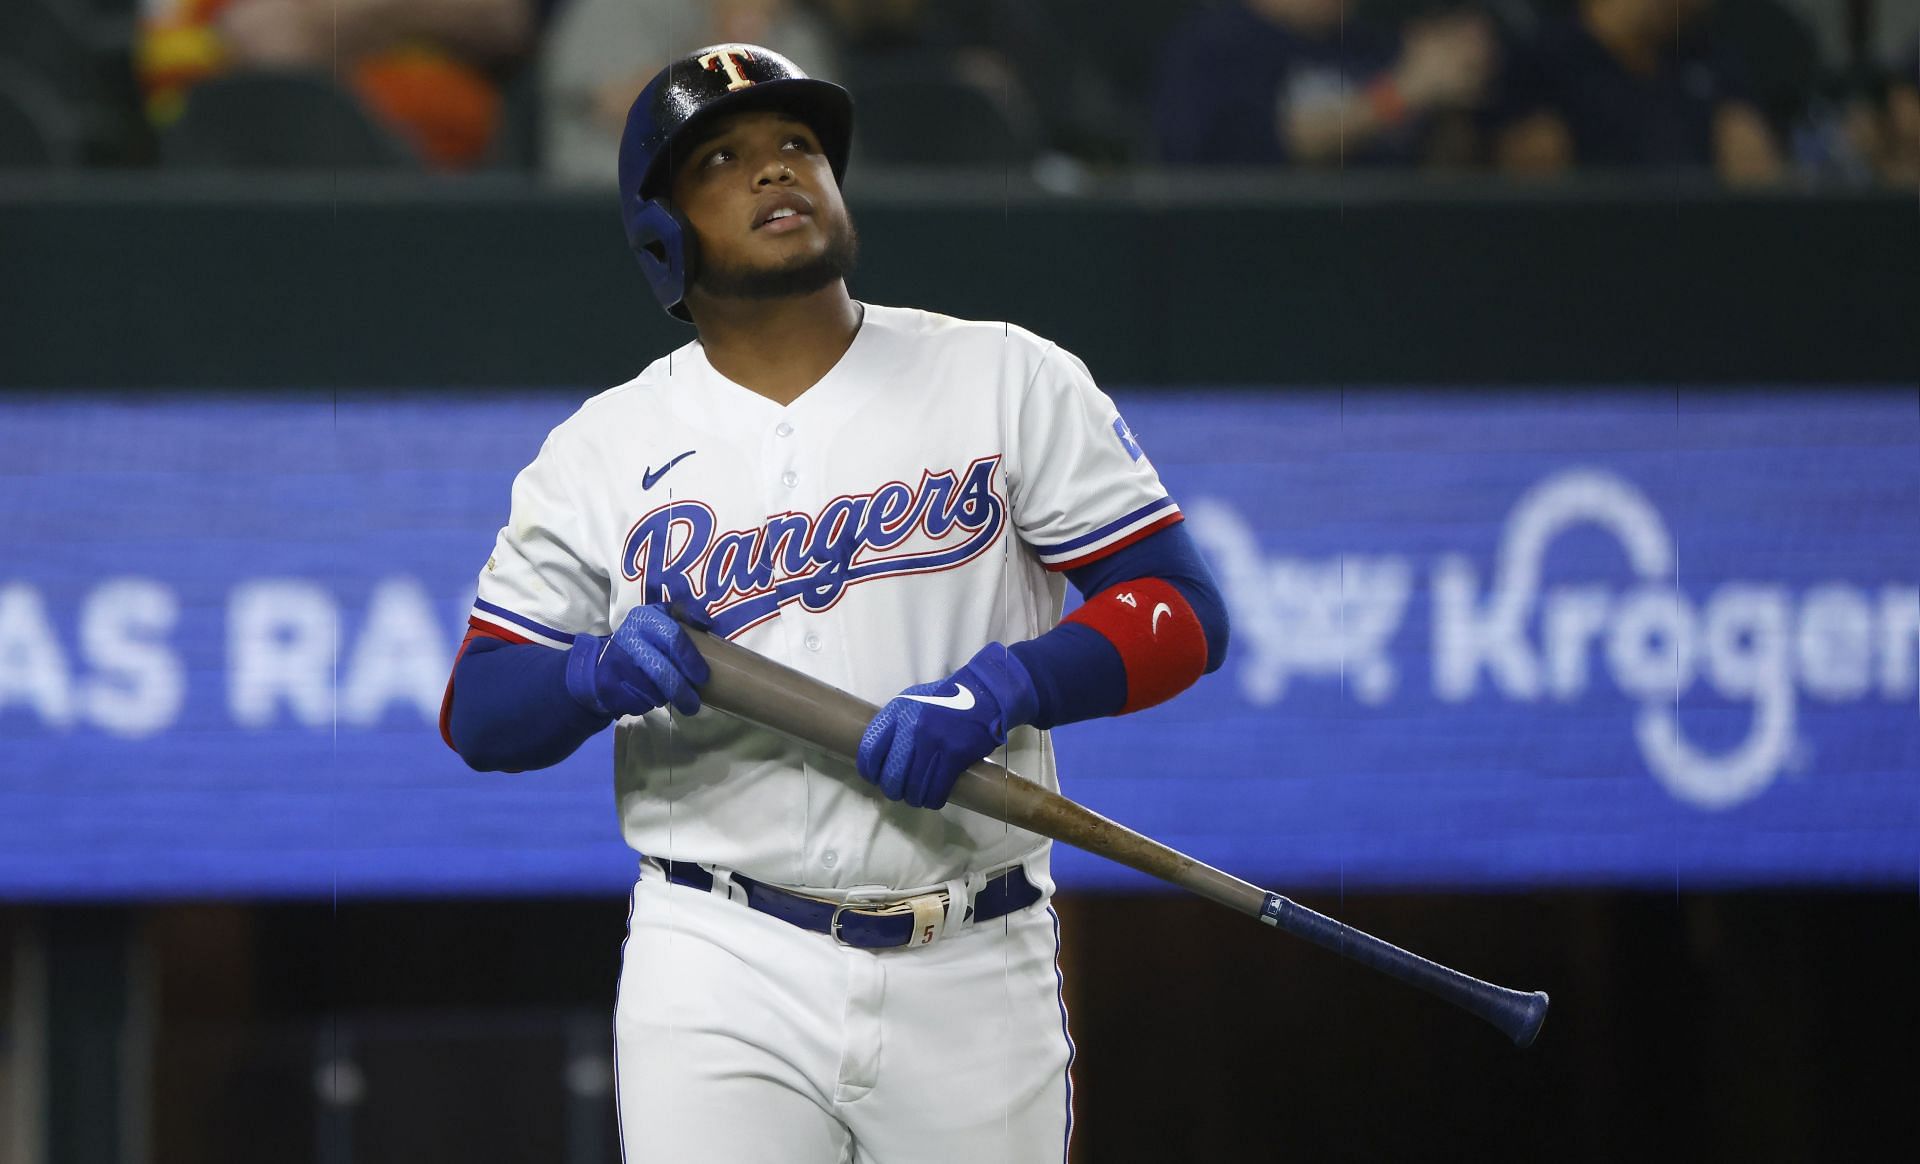 After his demotion, Rangers outfielder Willie Calhoun is openly questionning his role within the organization.